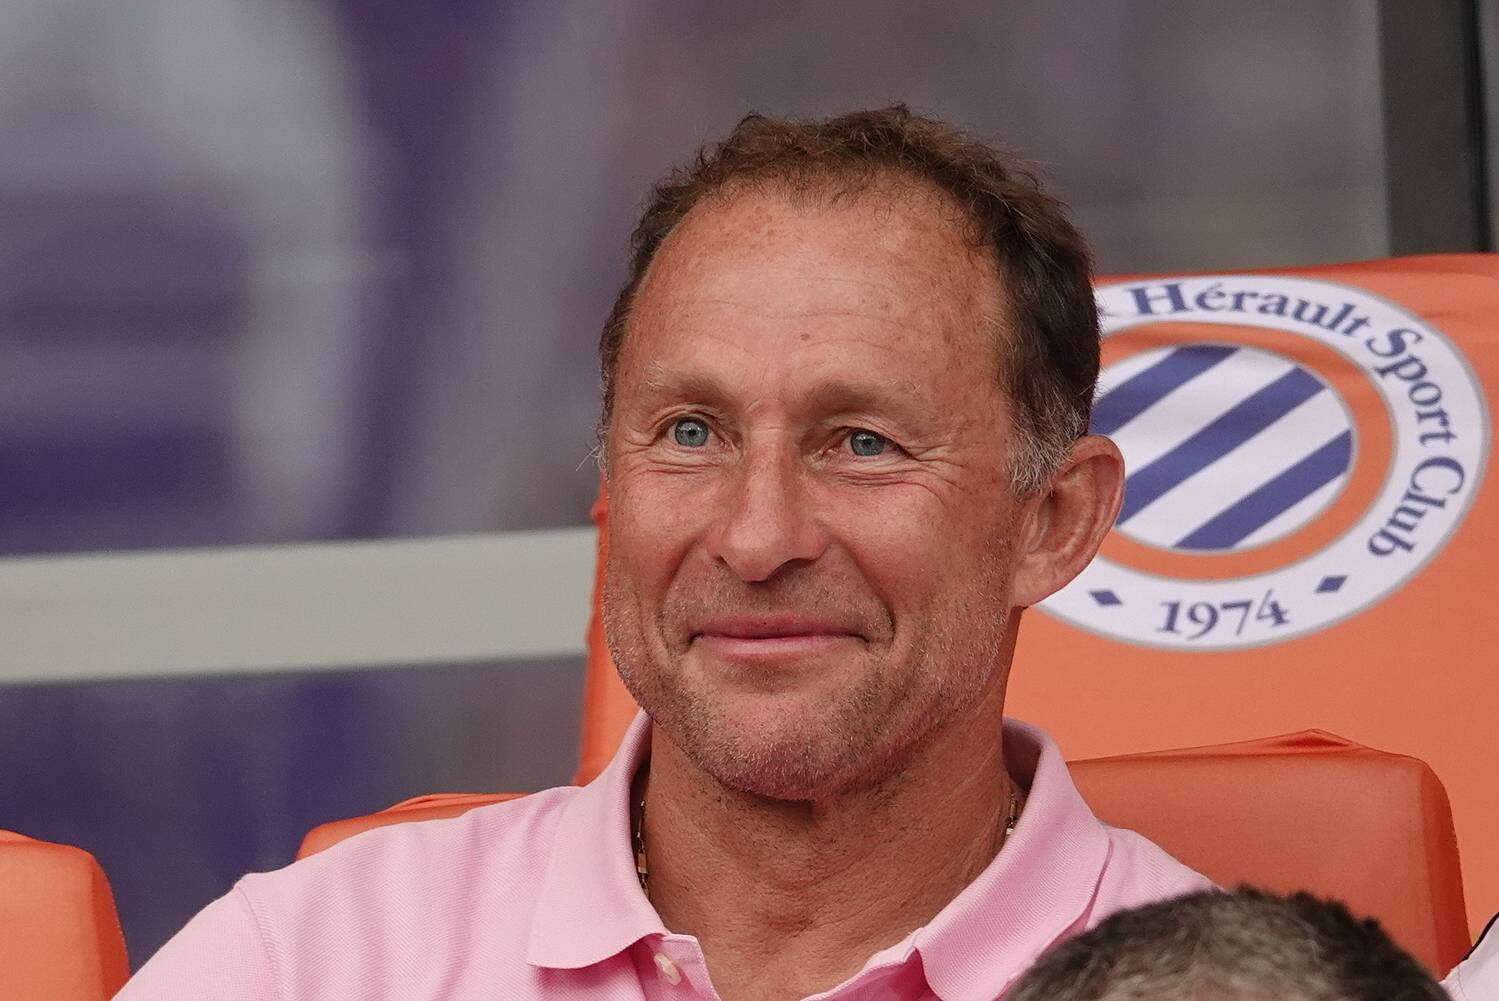 Jean-Pierre Papin takes over as manager of 4th division side Chartres - Get  French Football News